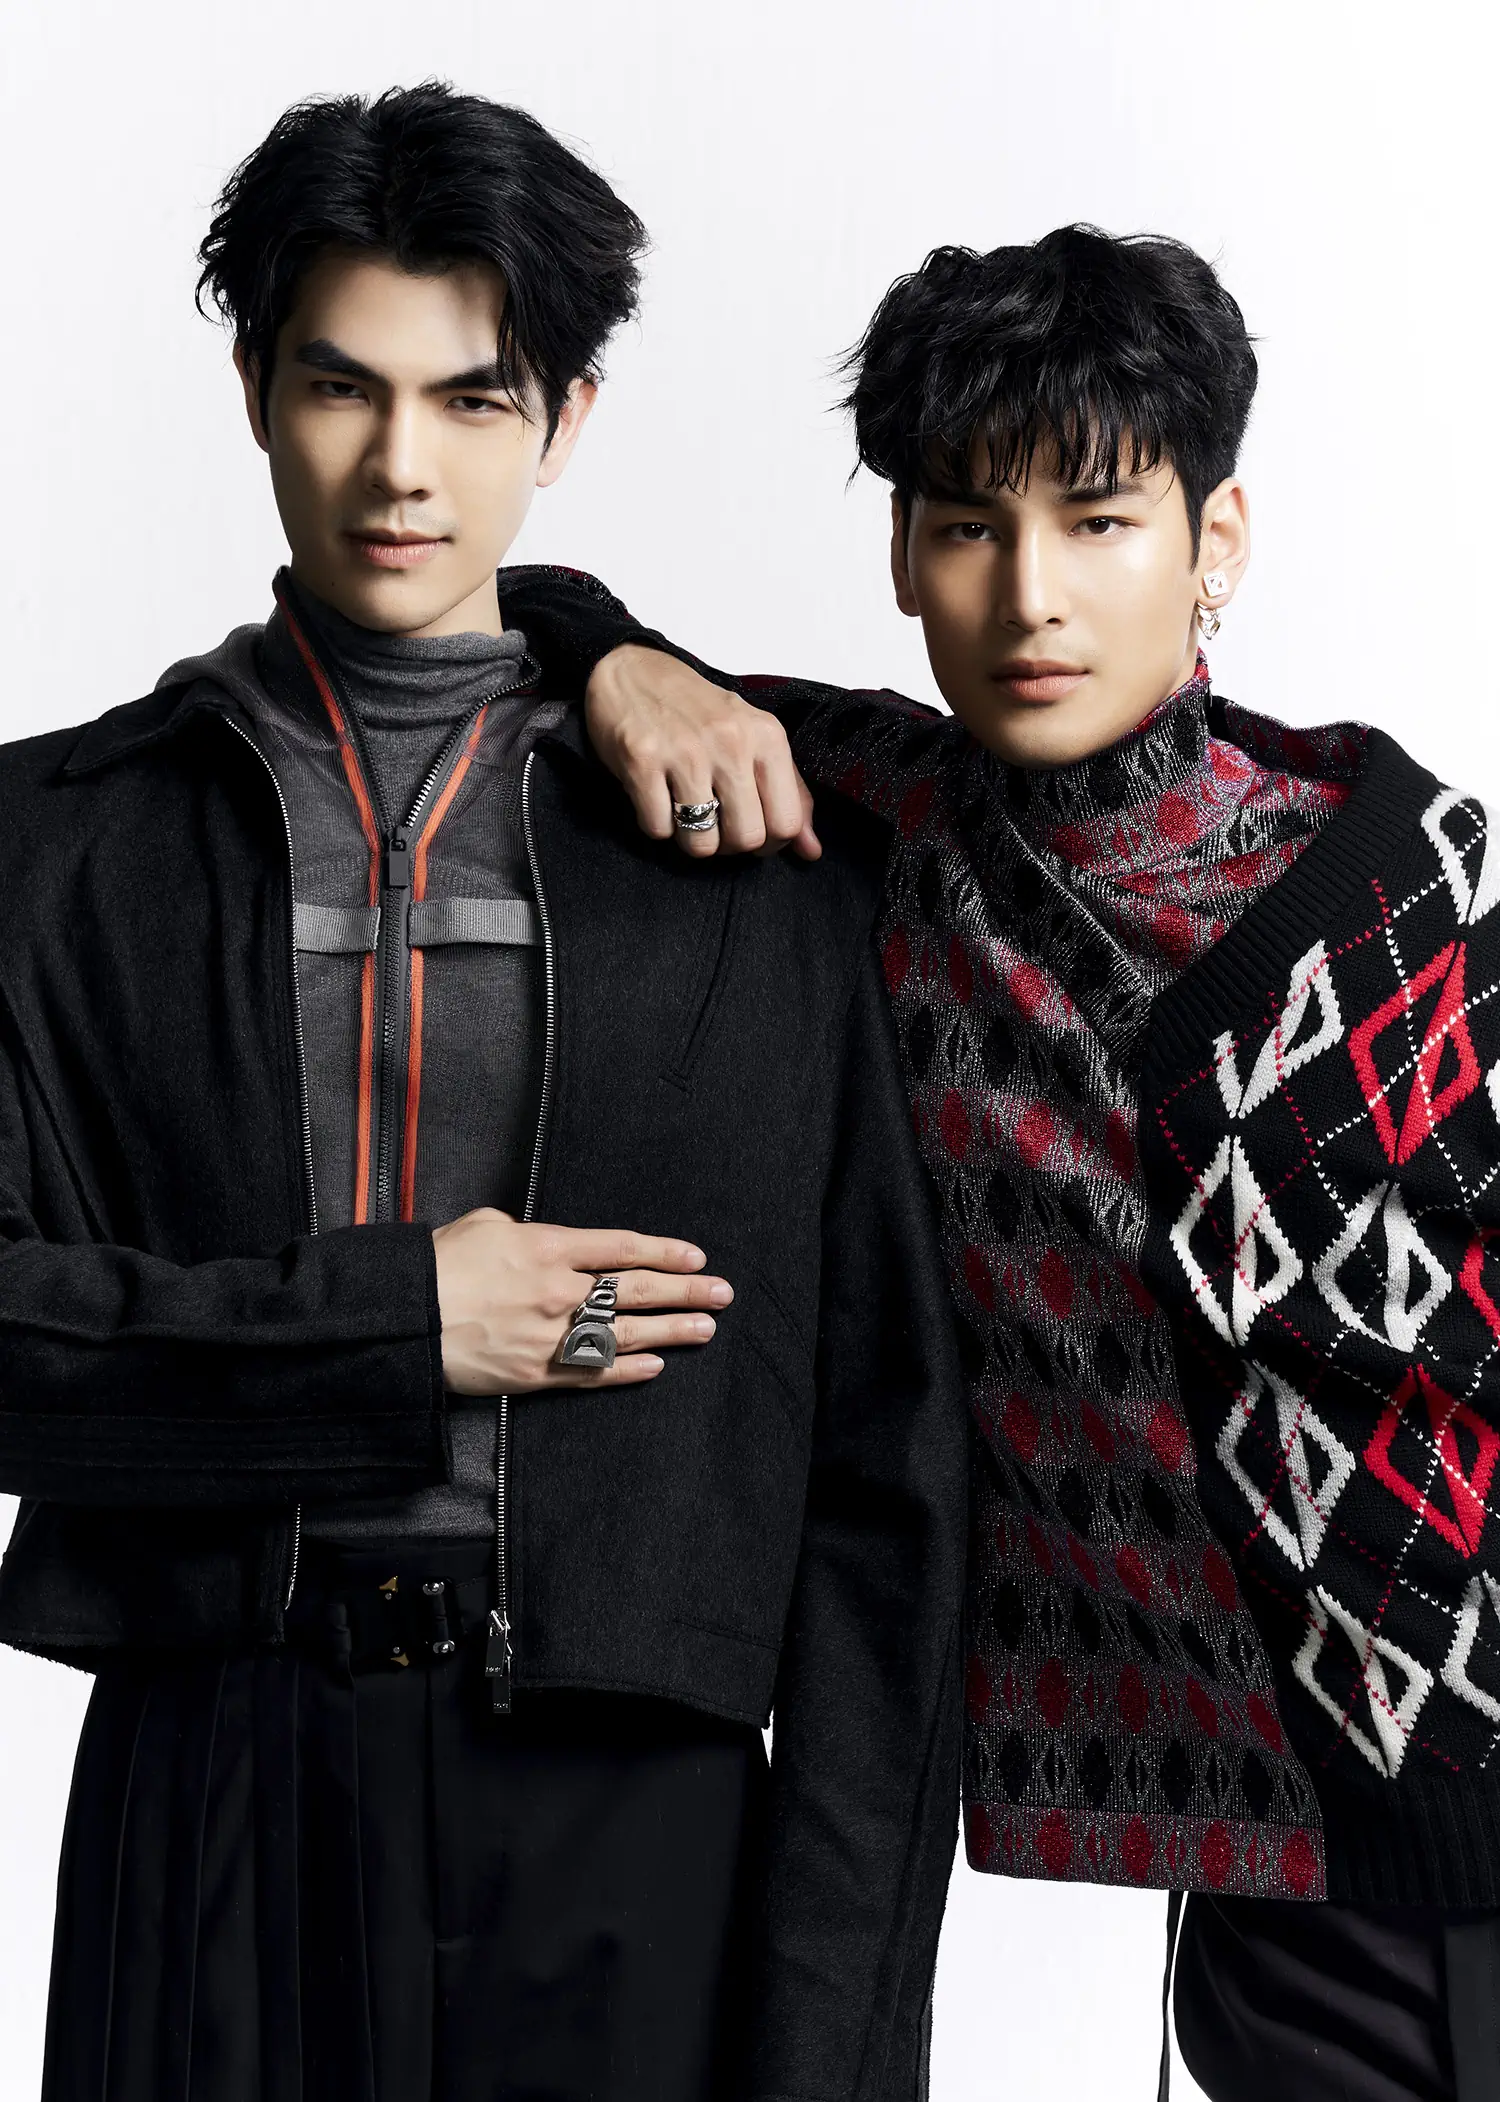 Dior appoints Thai actors Mile and Apo as new brand ambassadors